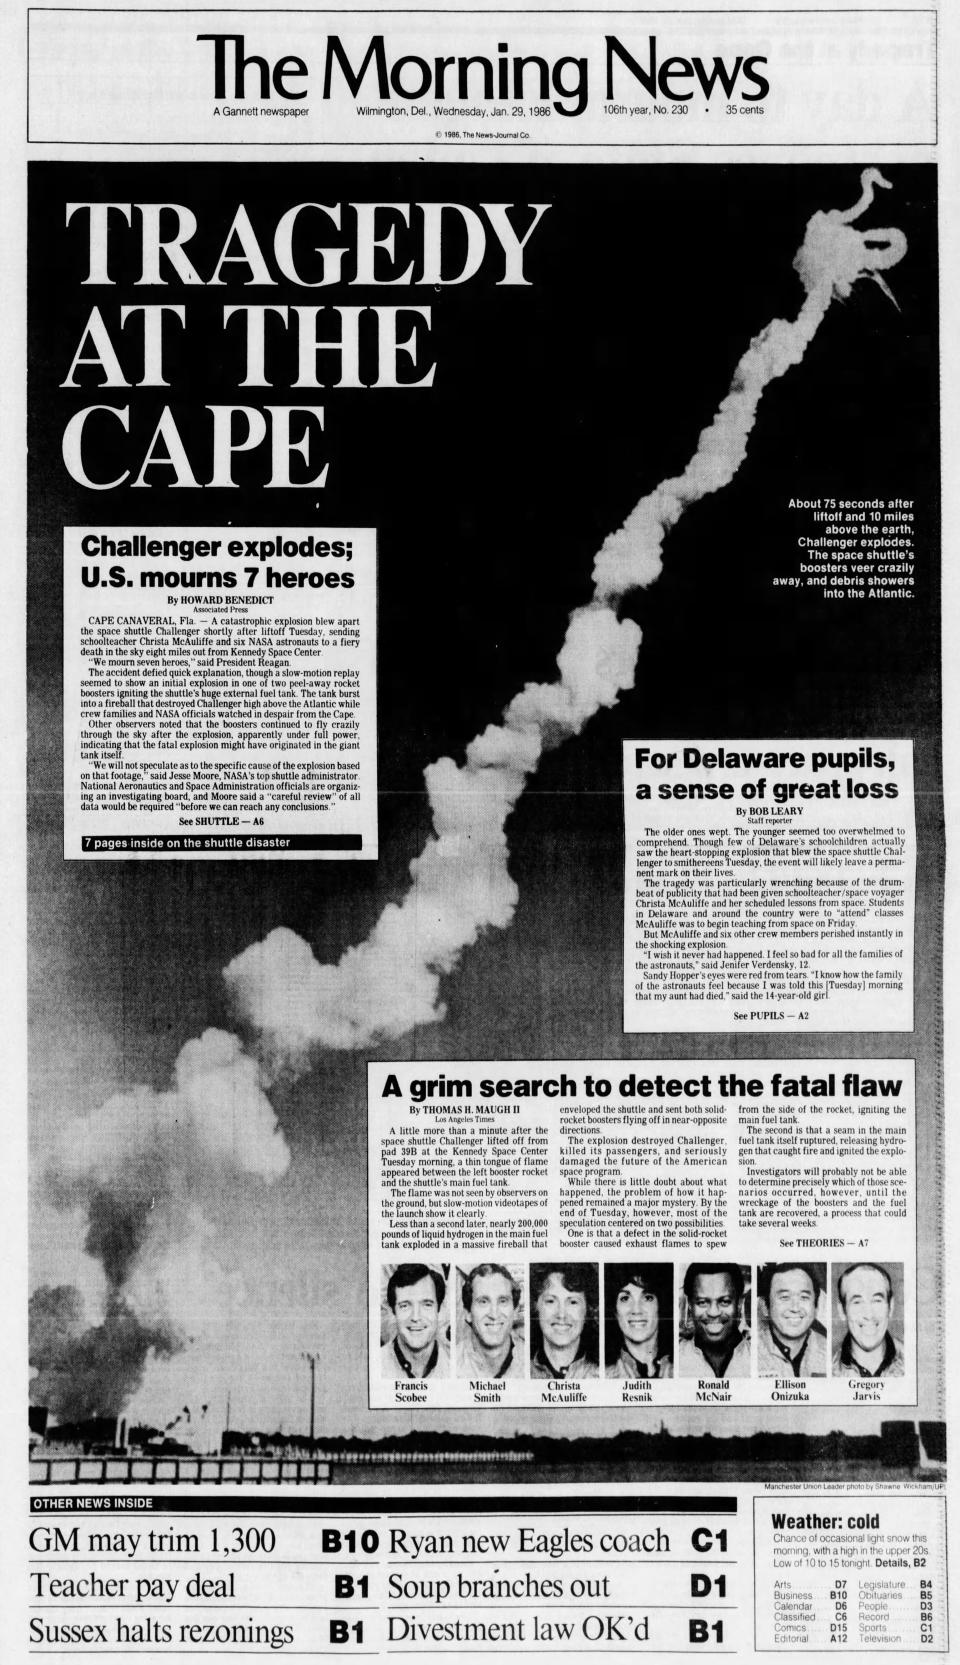 Front page of The Morning News from Jan. 29, 1986.